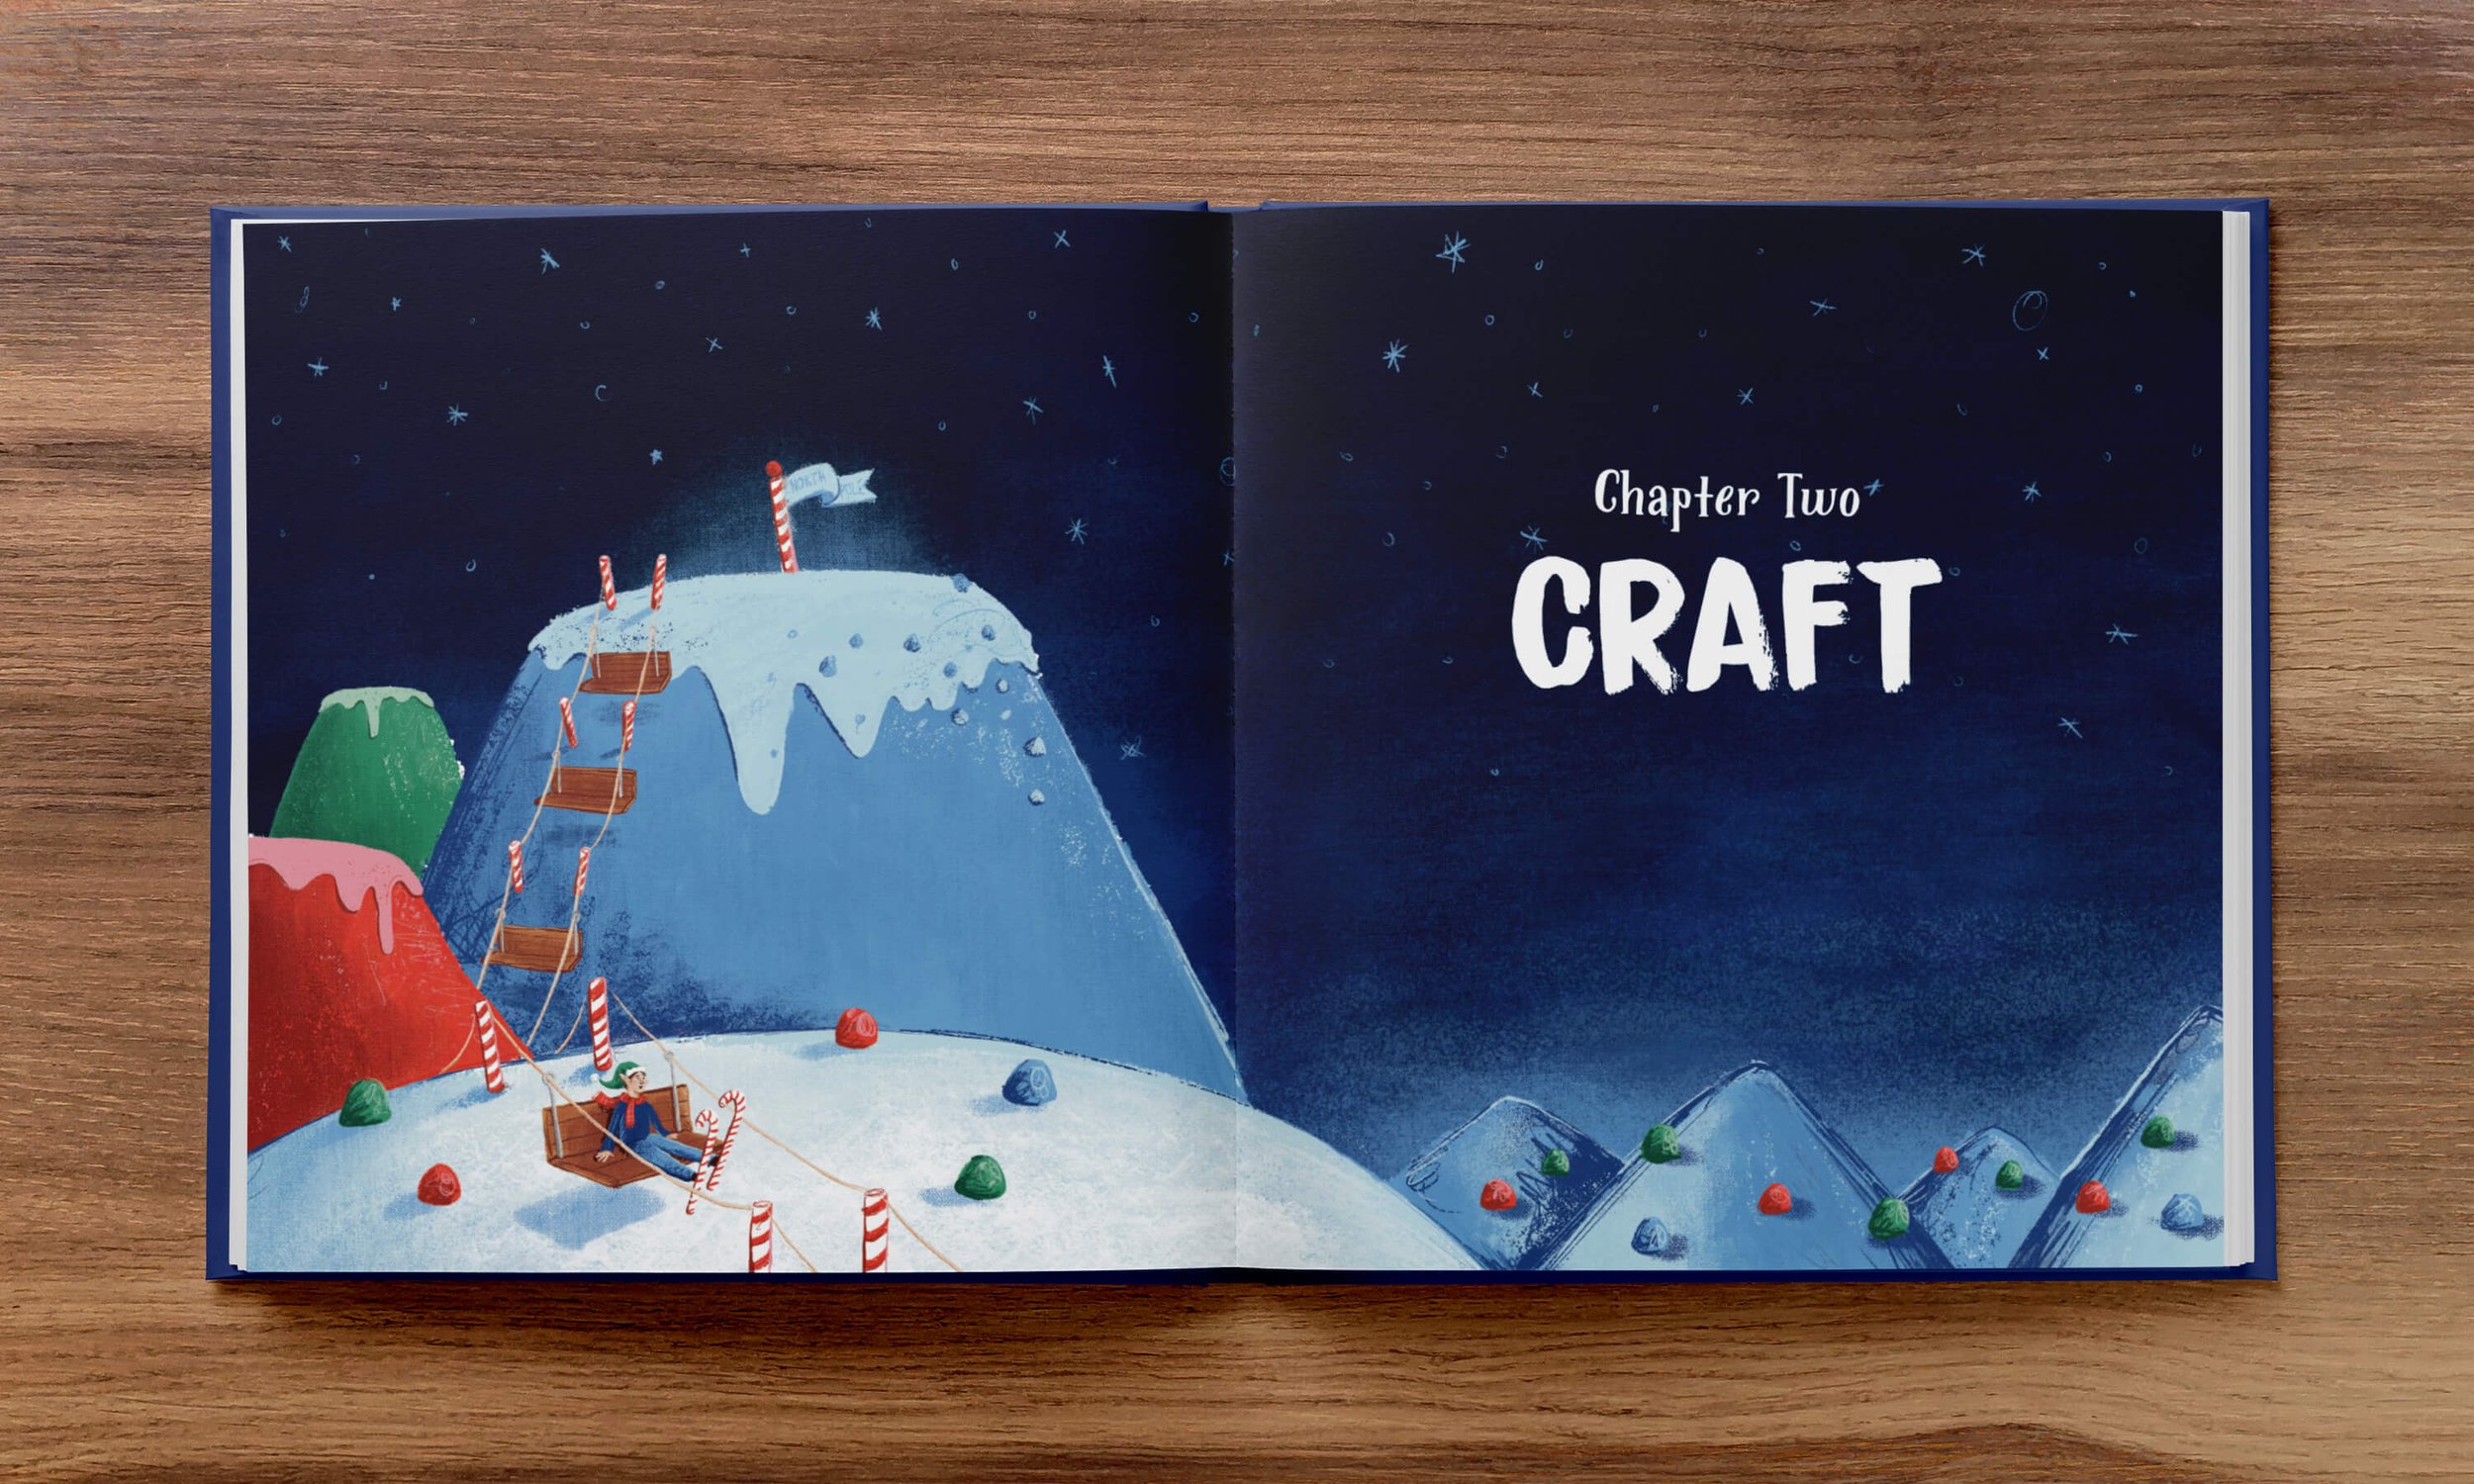  An open book on a wooden surface with a colorful illustration of a whimsical snow-covered landscape made of gumdrop mountains. the left page shows a scene with a ski lift going up a cliff, ridden by an elf in candy cane skis, and the right page read